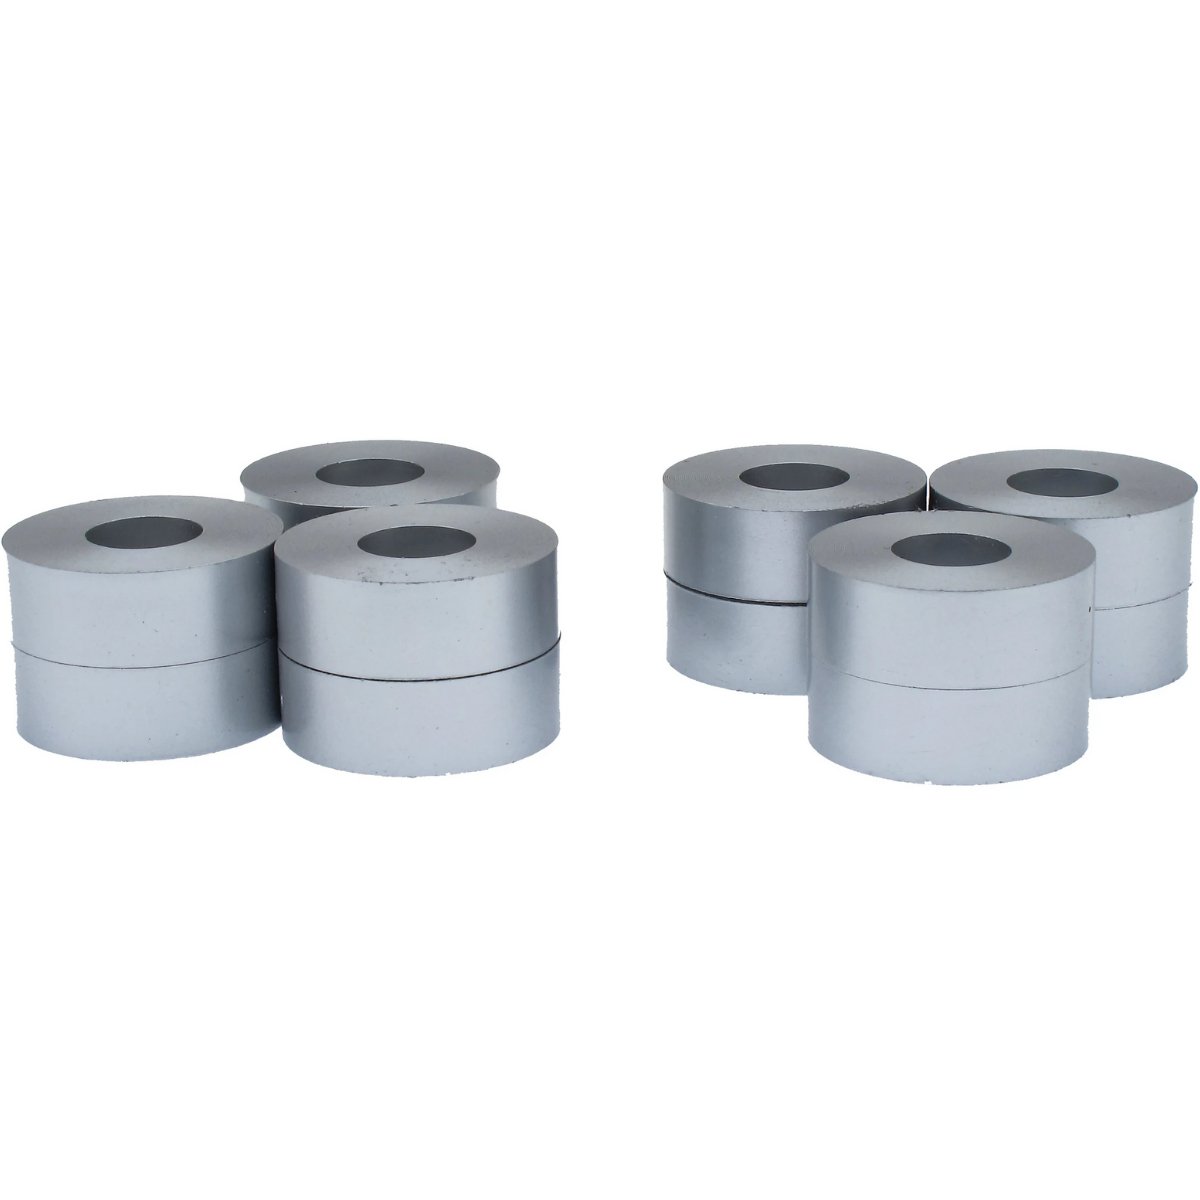 Accurascale 6 Steel Coil Loads - Phillips Hobbies